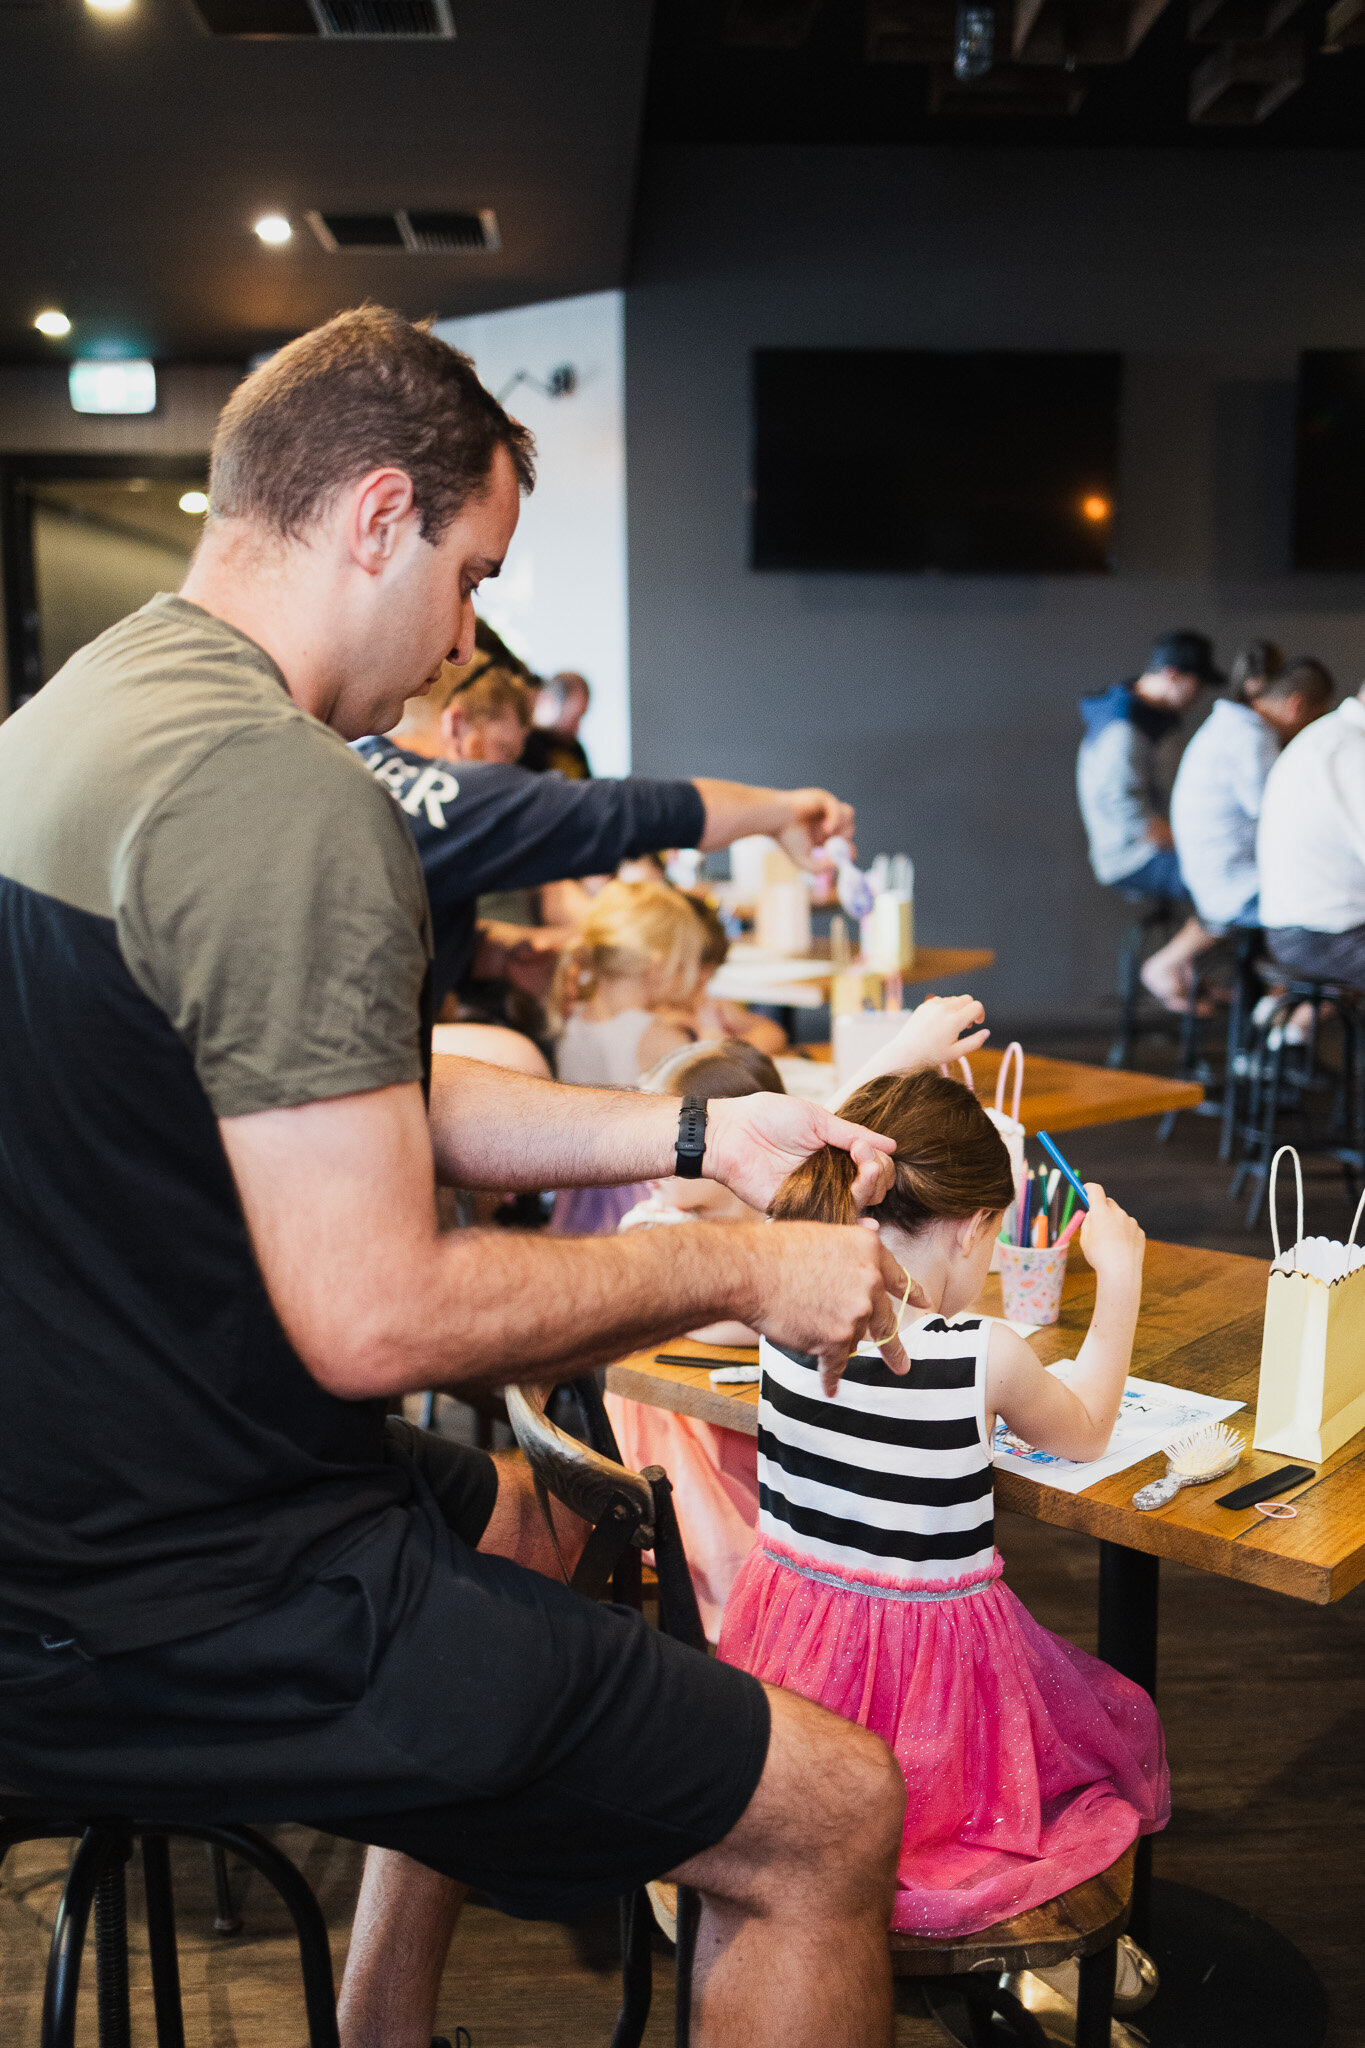 💇&zwj;♀️ DADDY DAUGHTER HAIRCARE 💇&zwj;♀️

Join us on Saturday April 13 at 10am and learn to create four different hairstyles your daughter can show off at school! 🥰

$30 (+ $1 booking fee) per daddy &amp; daughter duo. Book per child, dad is incl